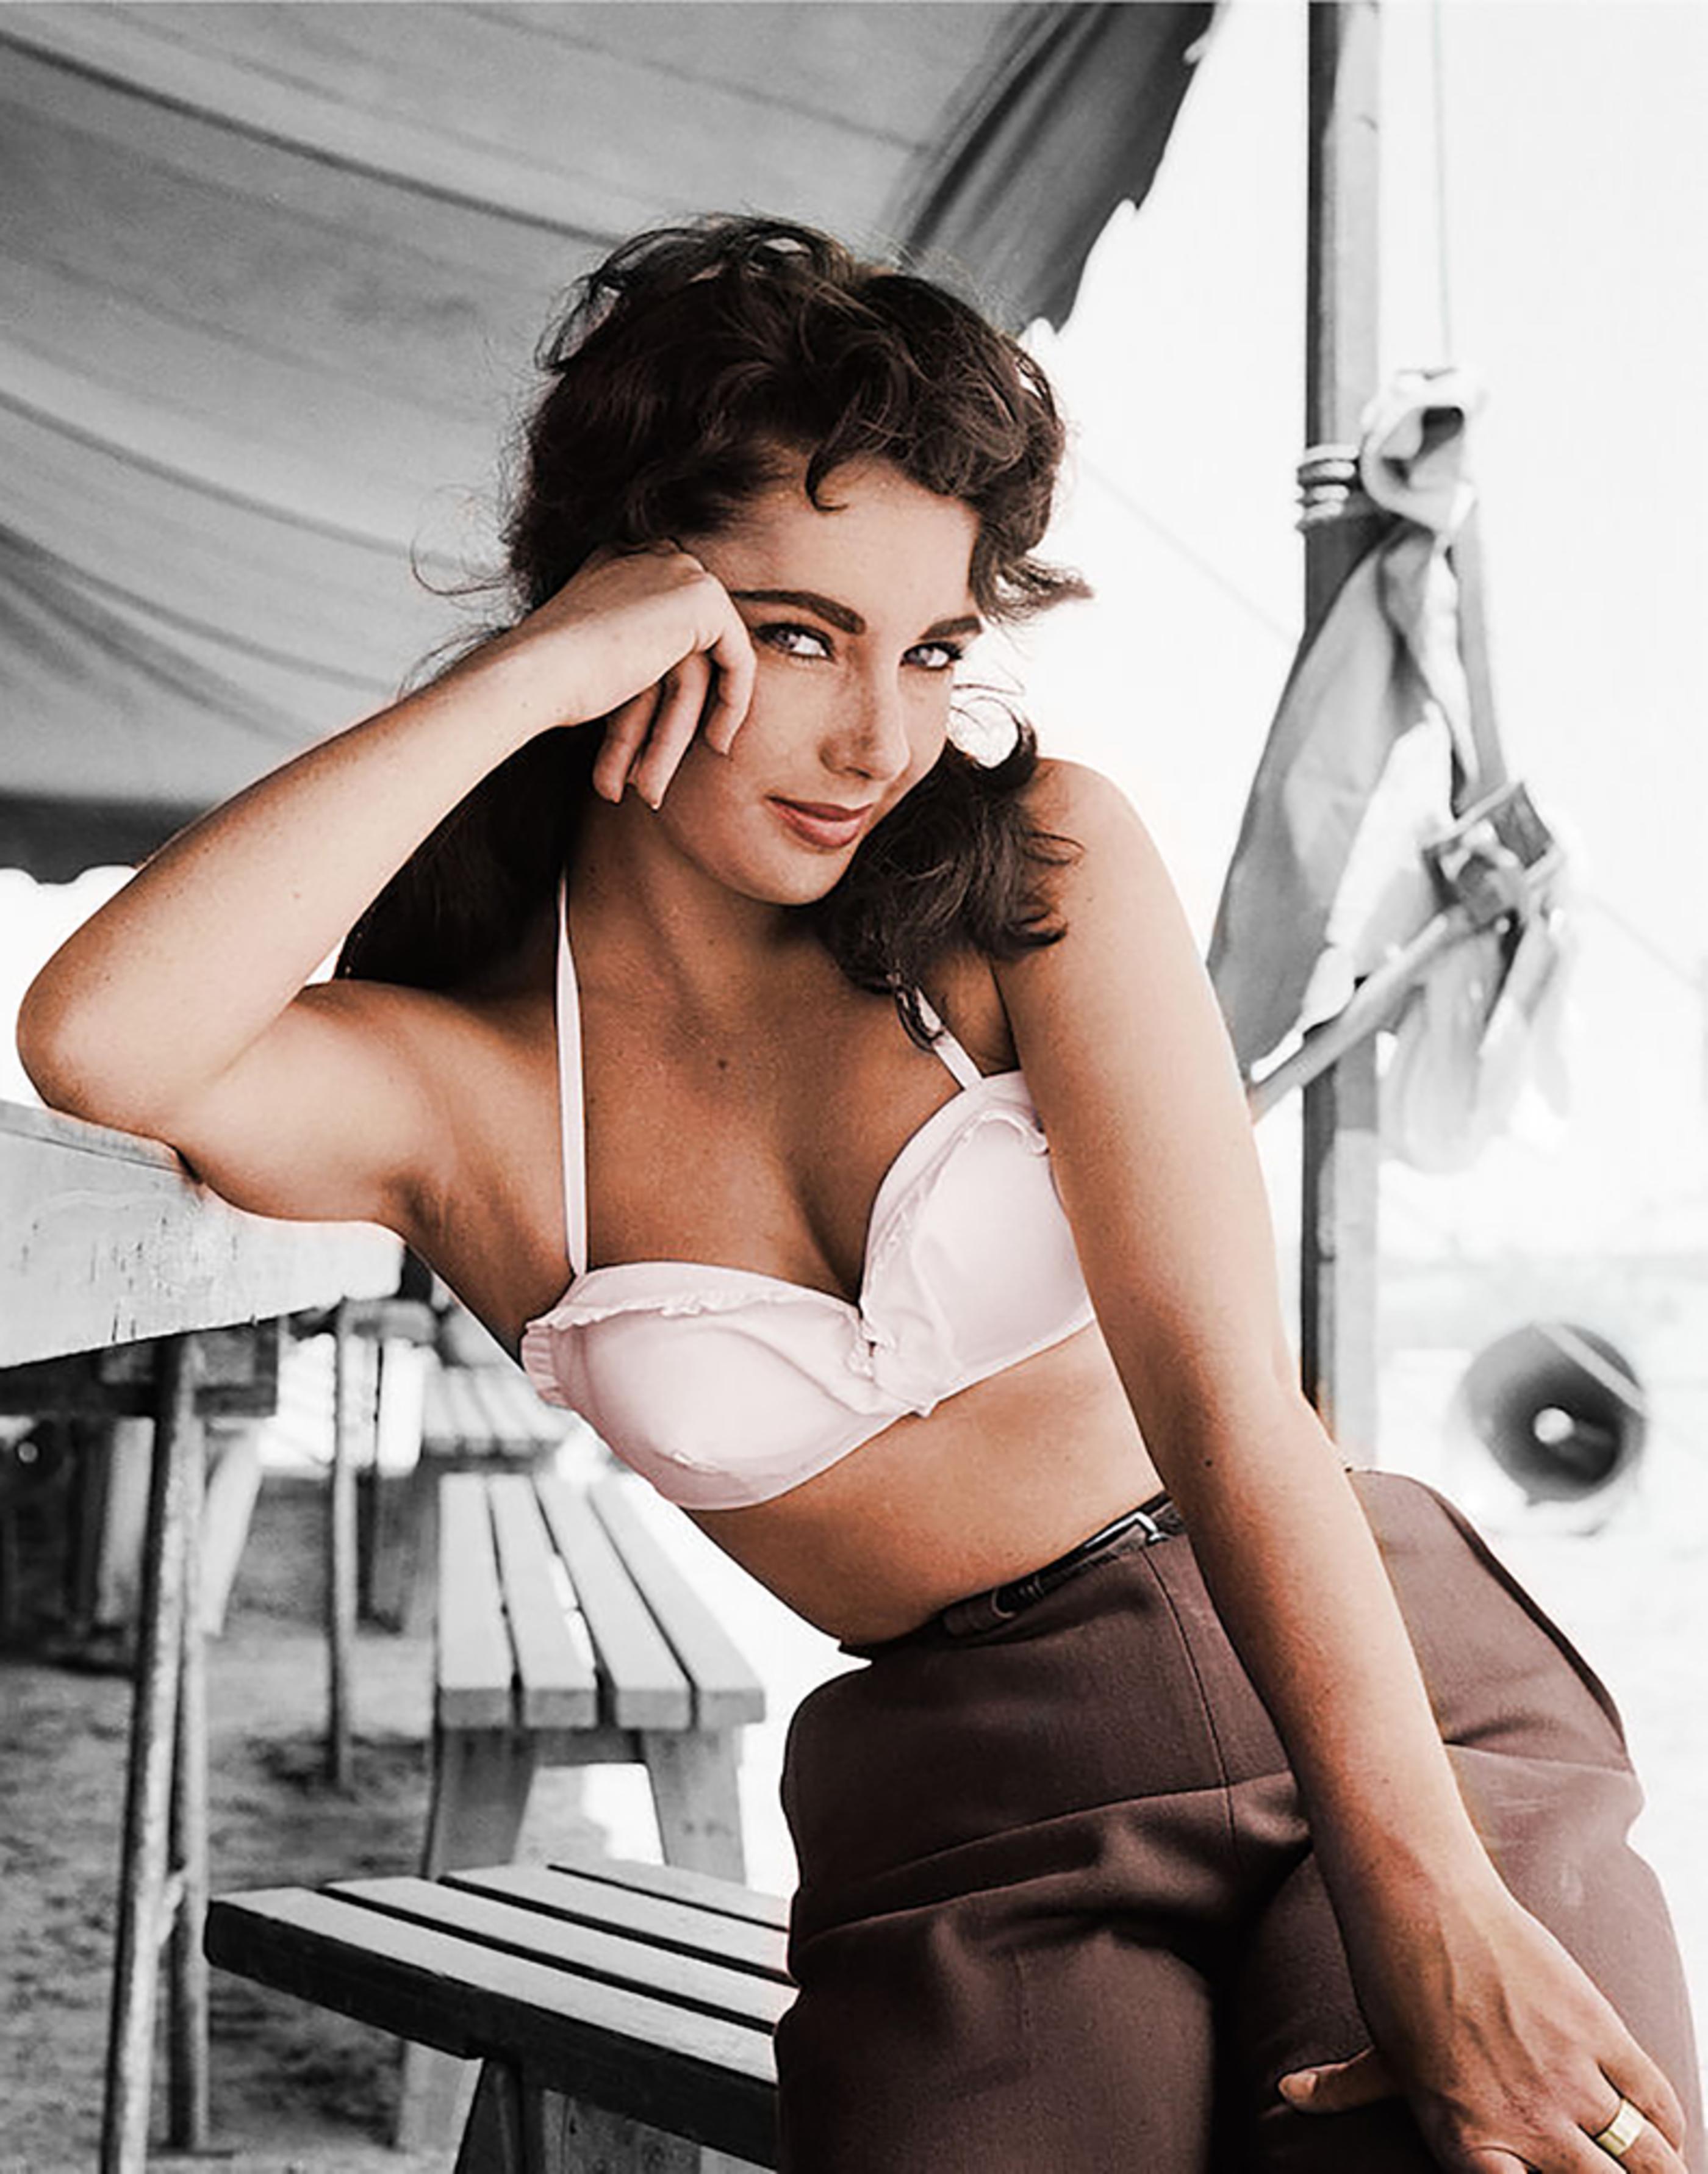 Frank Worth Color Photograph - Elizabeth Taylor on the Set of Giant